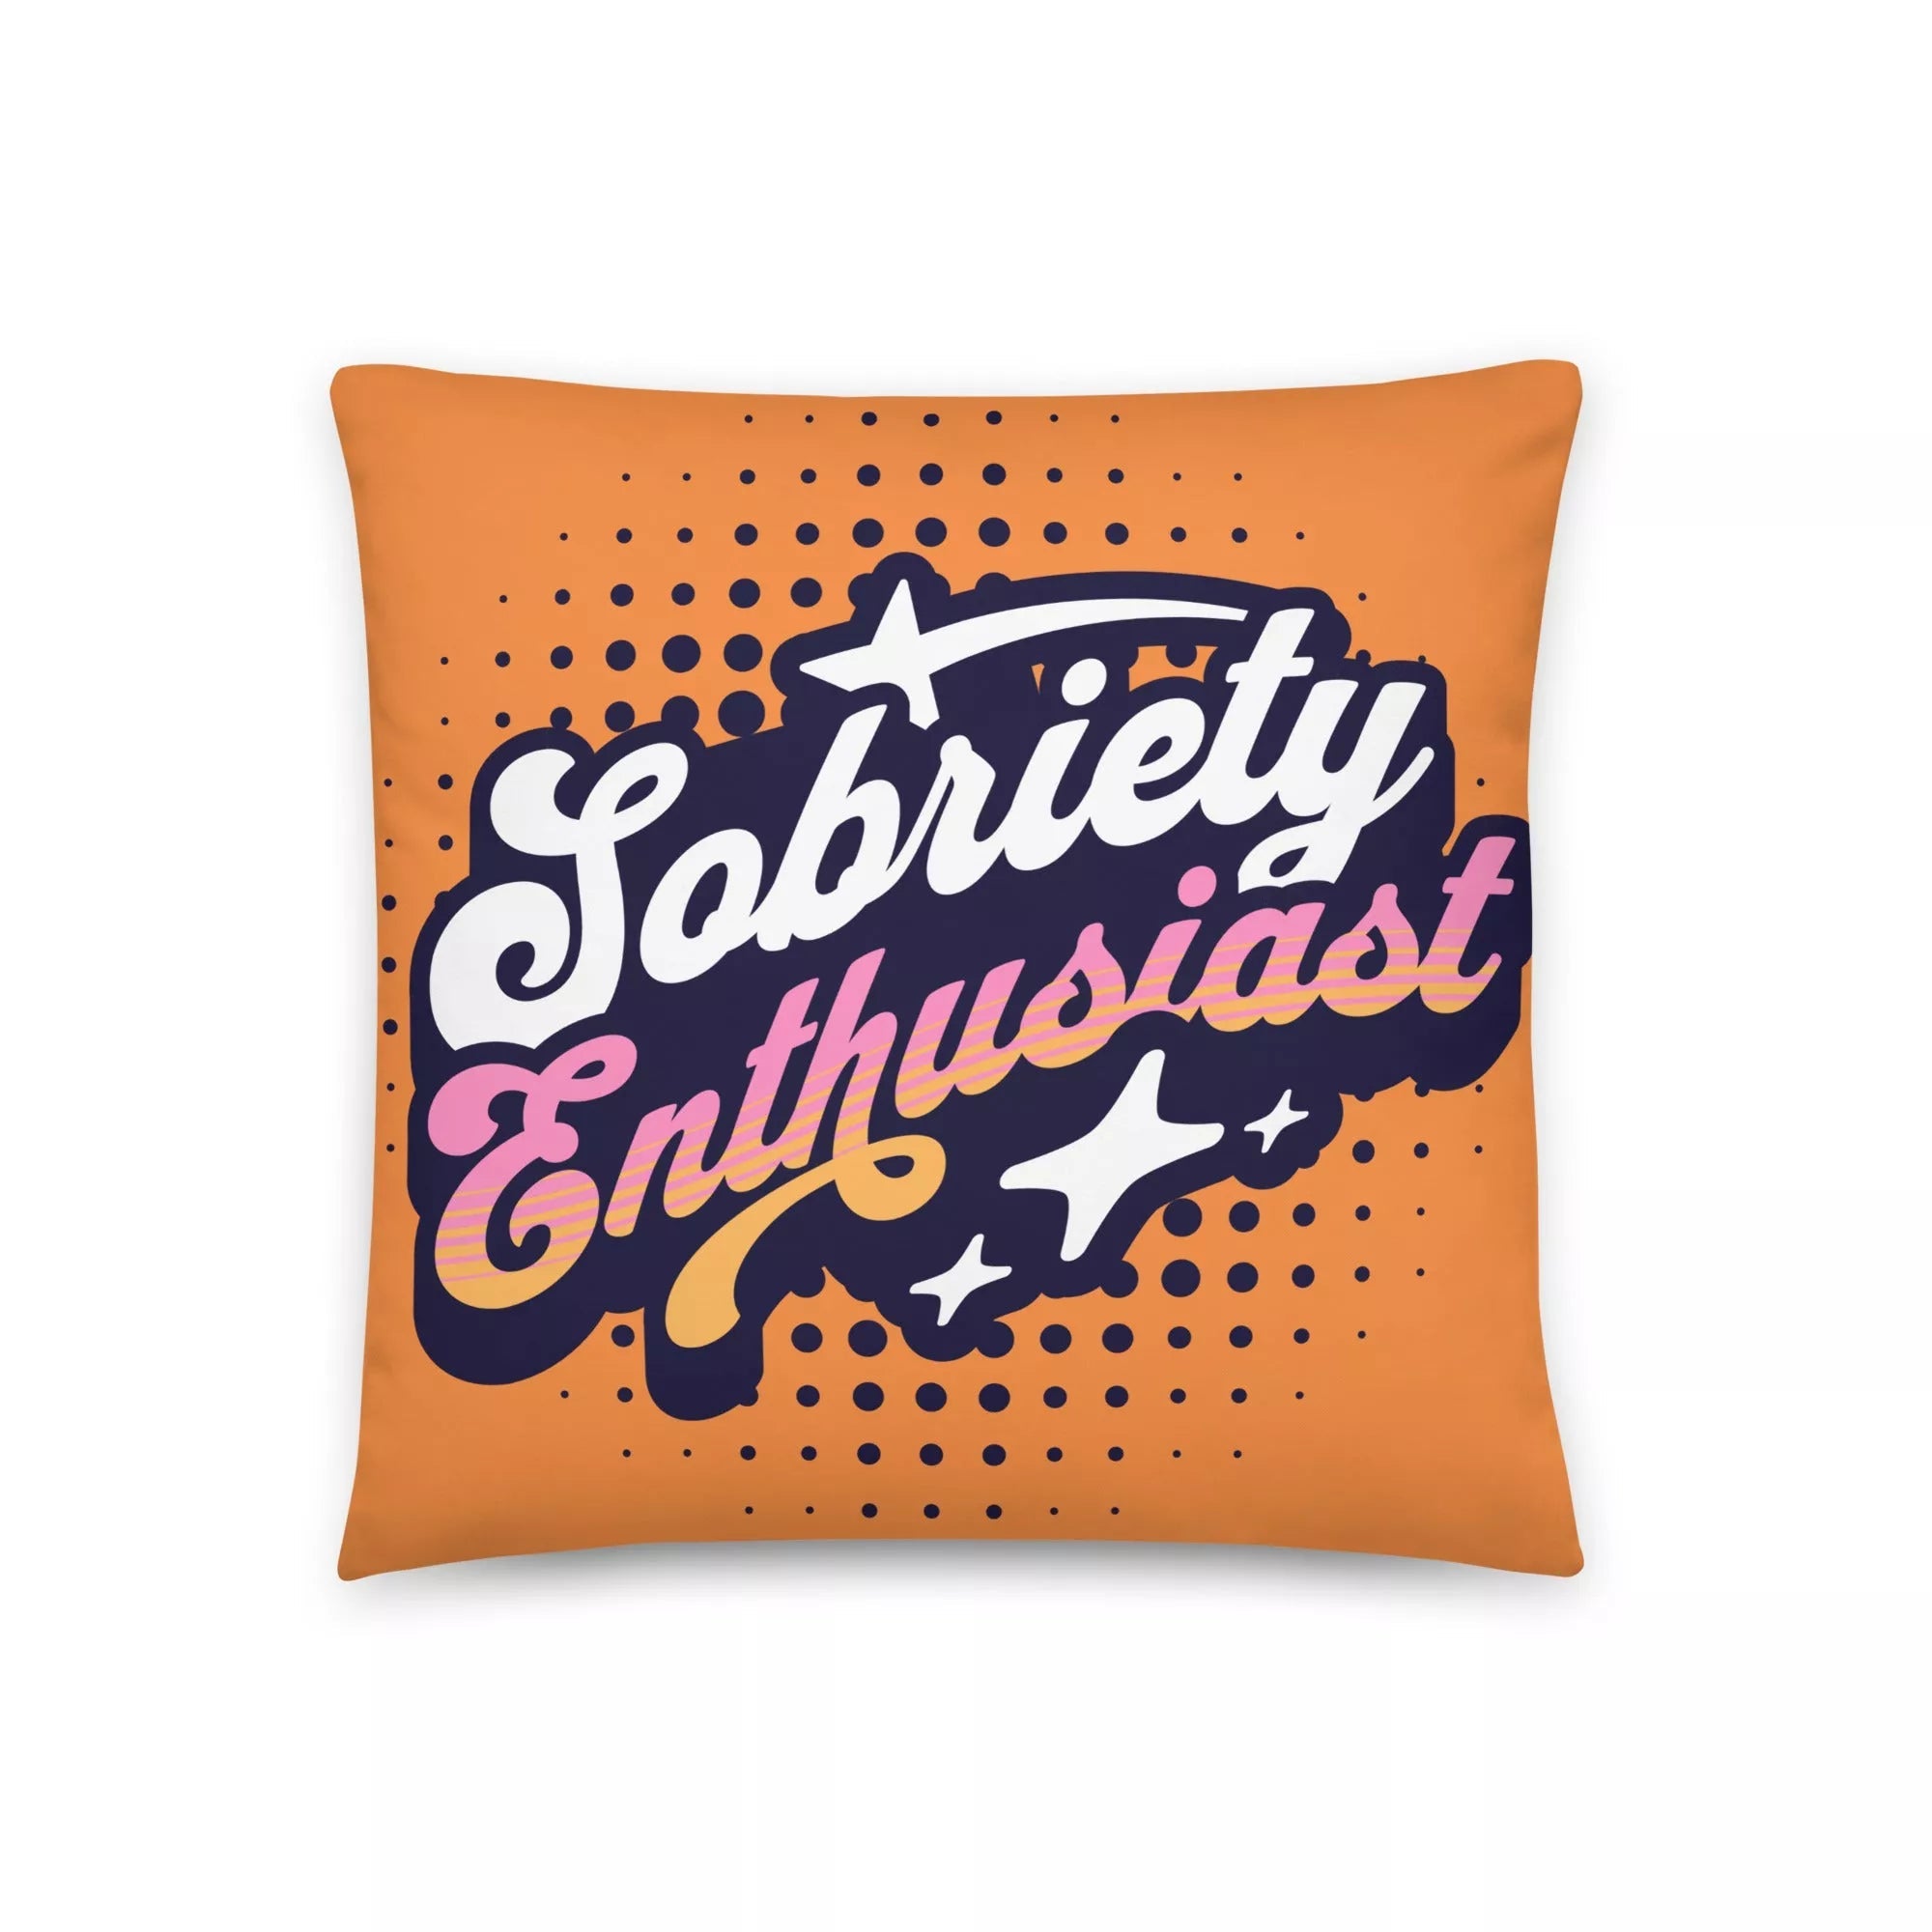 Sobriety Enthusiast - Accent Pillow - Sobervation